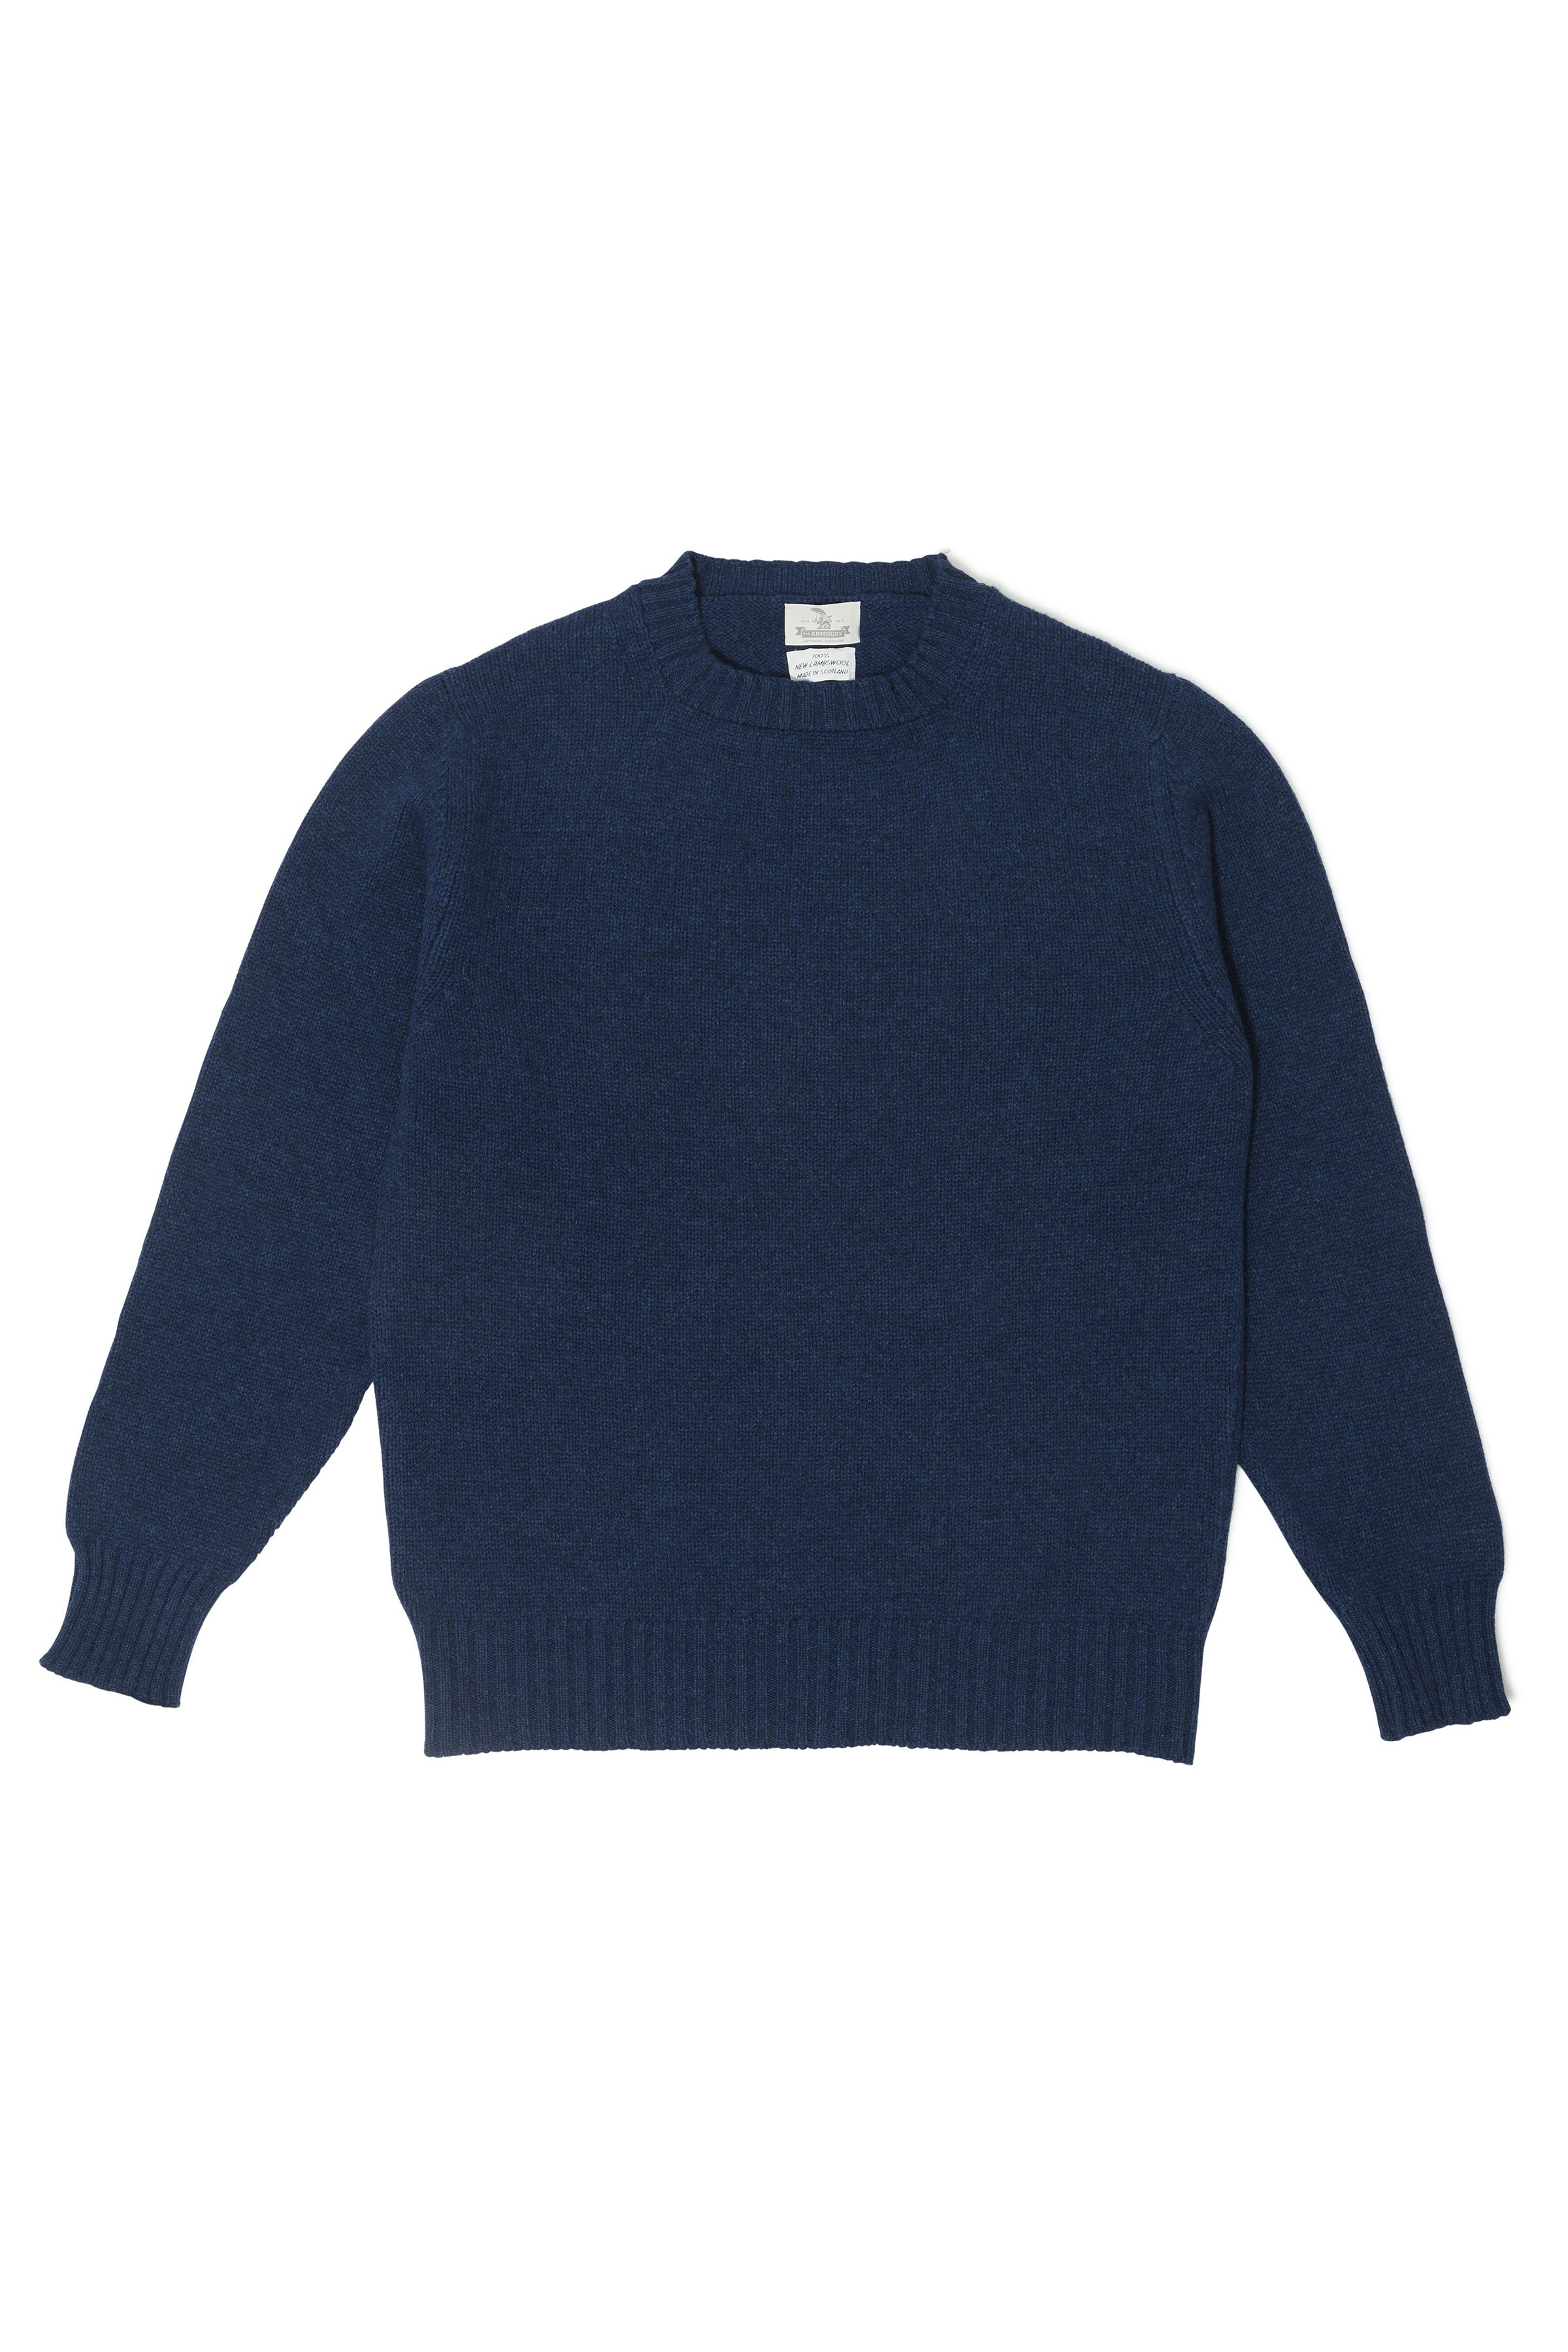 The Armoury Blue 4-ply Lambswool Crewneck Sweater